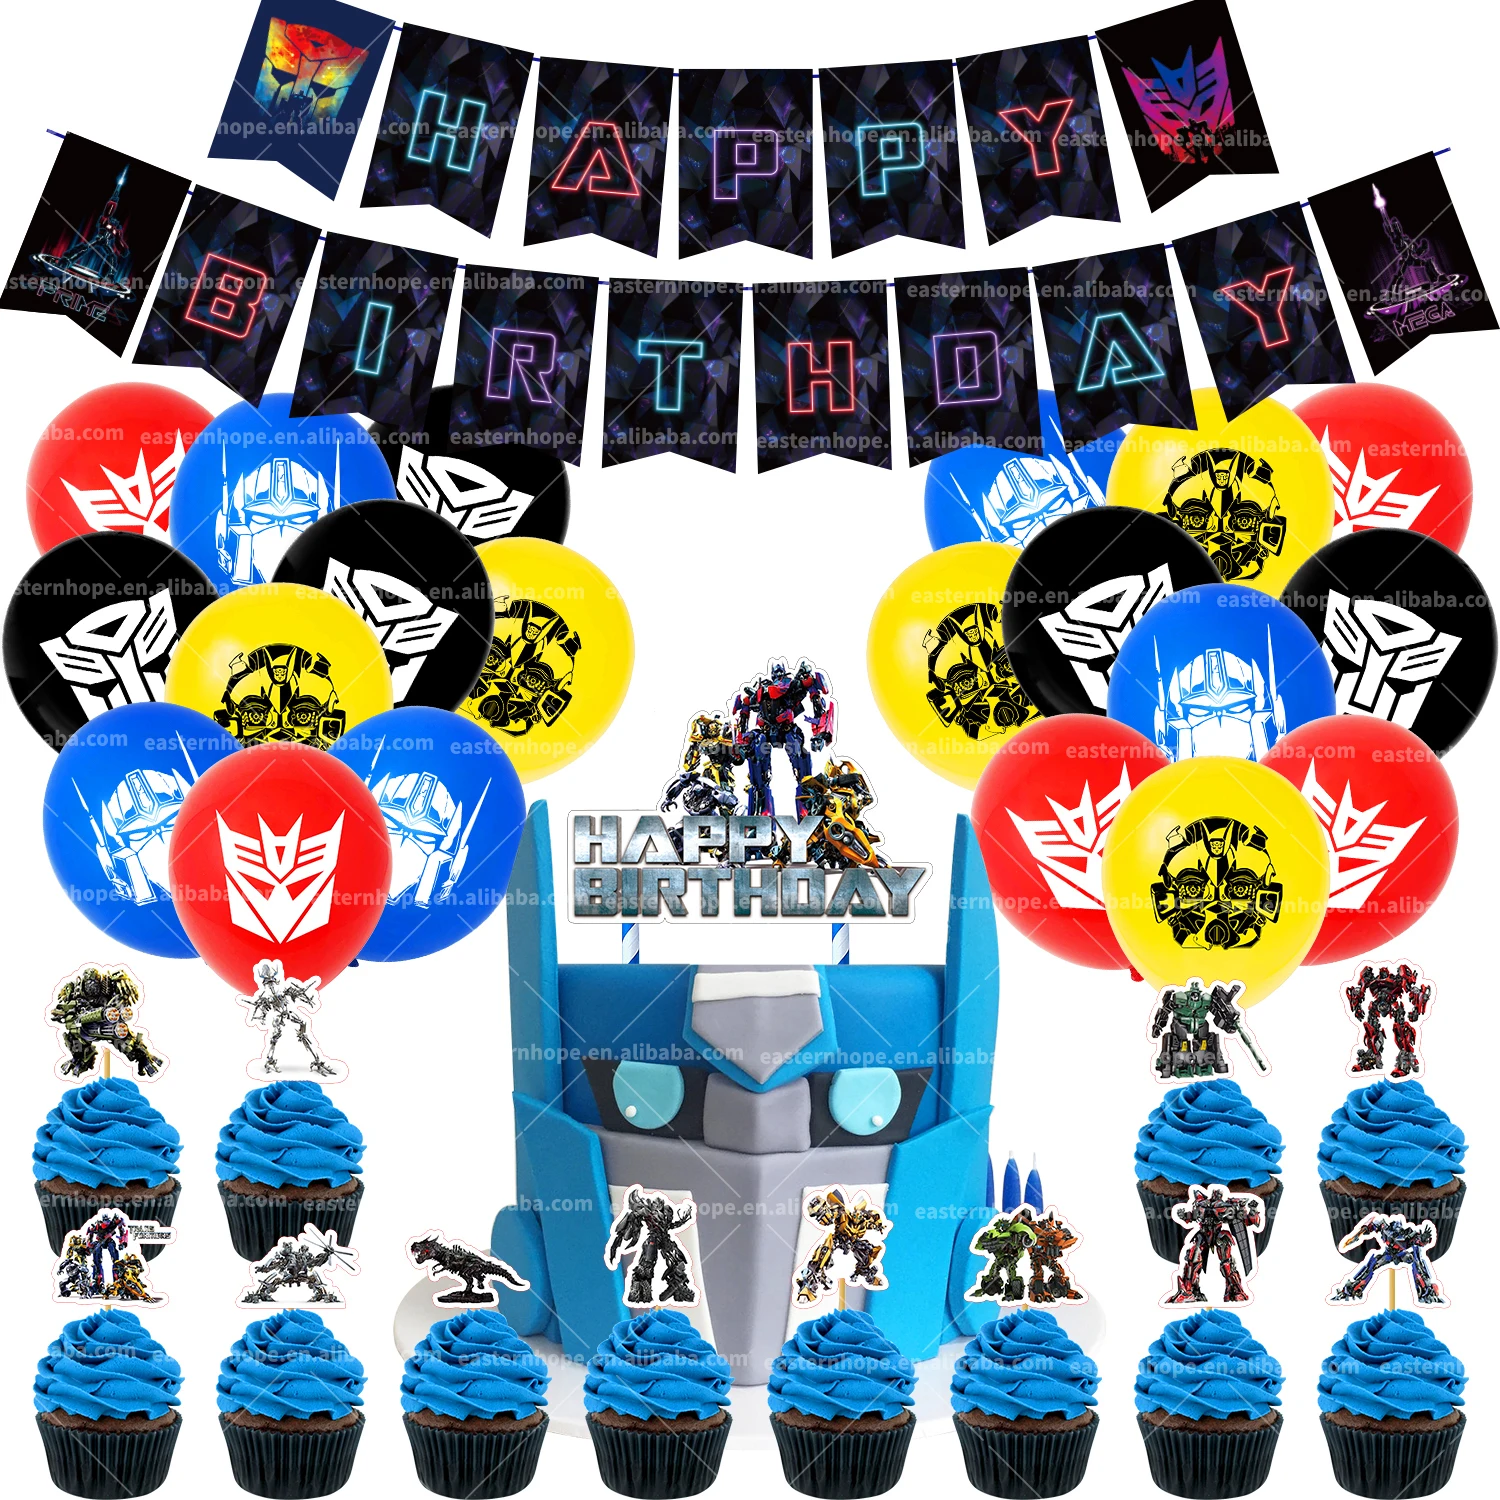 Transformers Bumble Bee Party Supplies Balloon Bundle for 4th Birthday